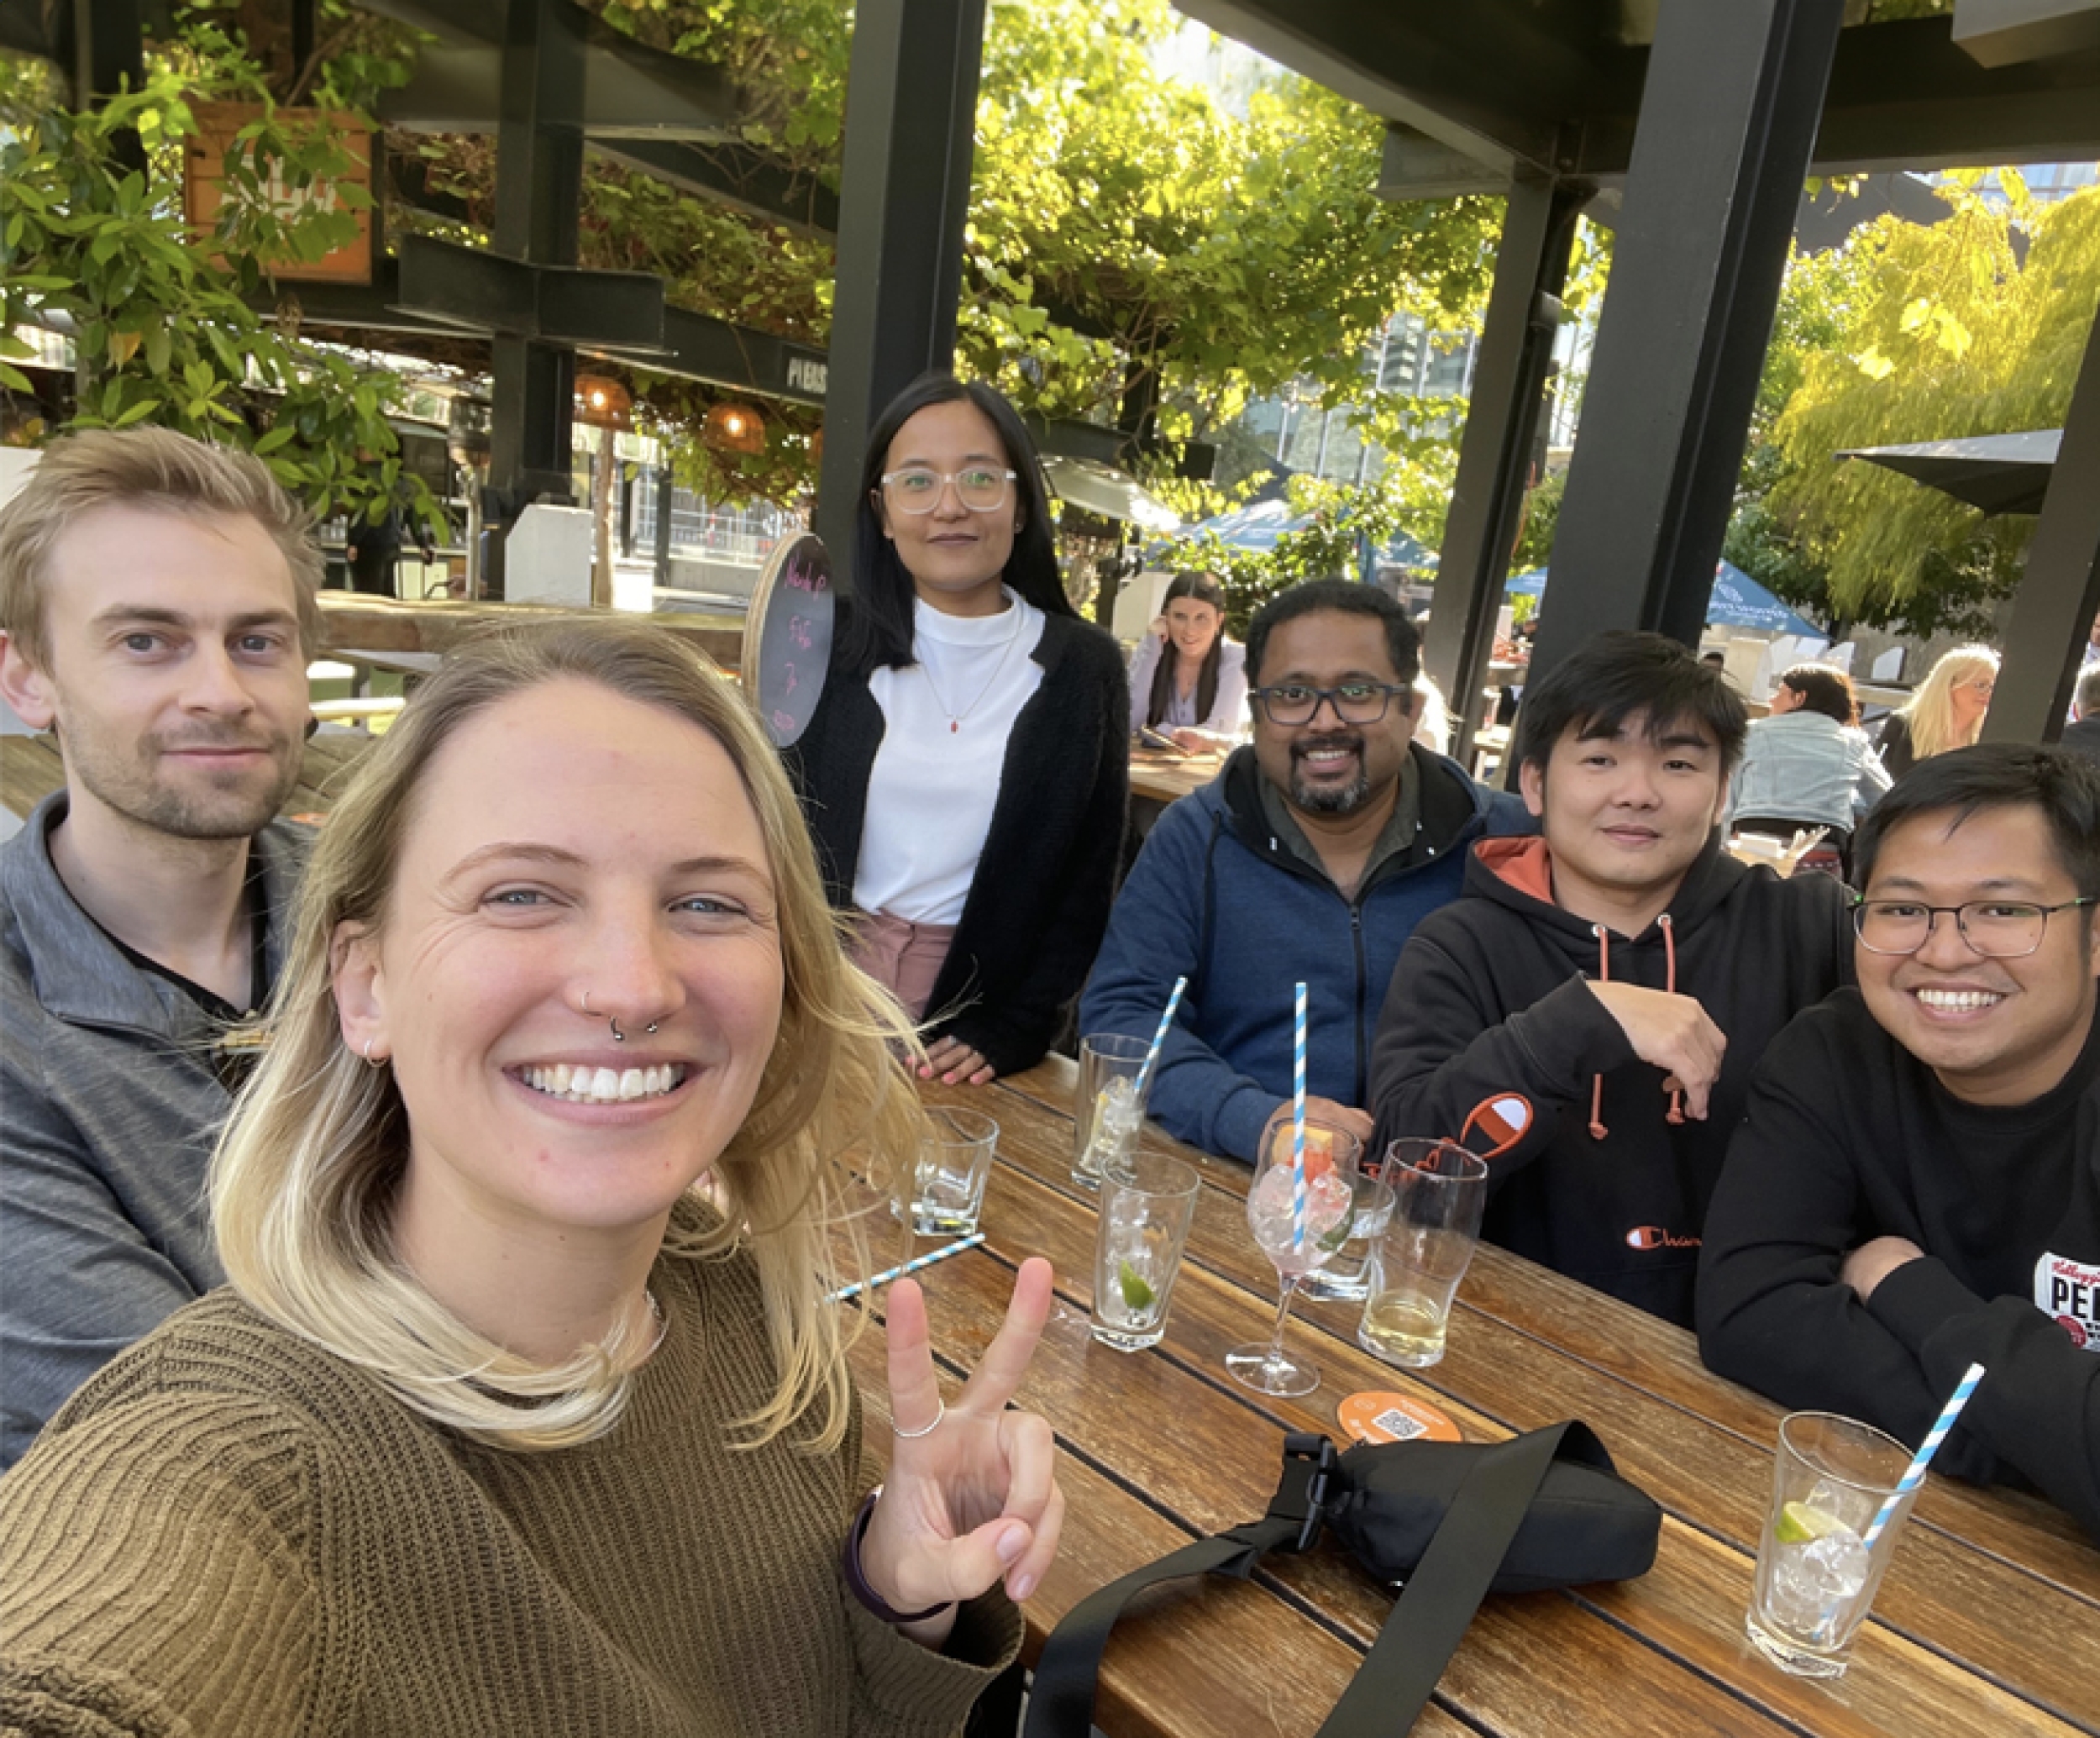 Snapshot of a small group of smiling mx51 colleagues having a drink at a table outside.